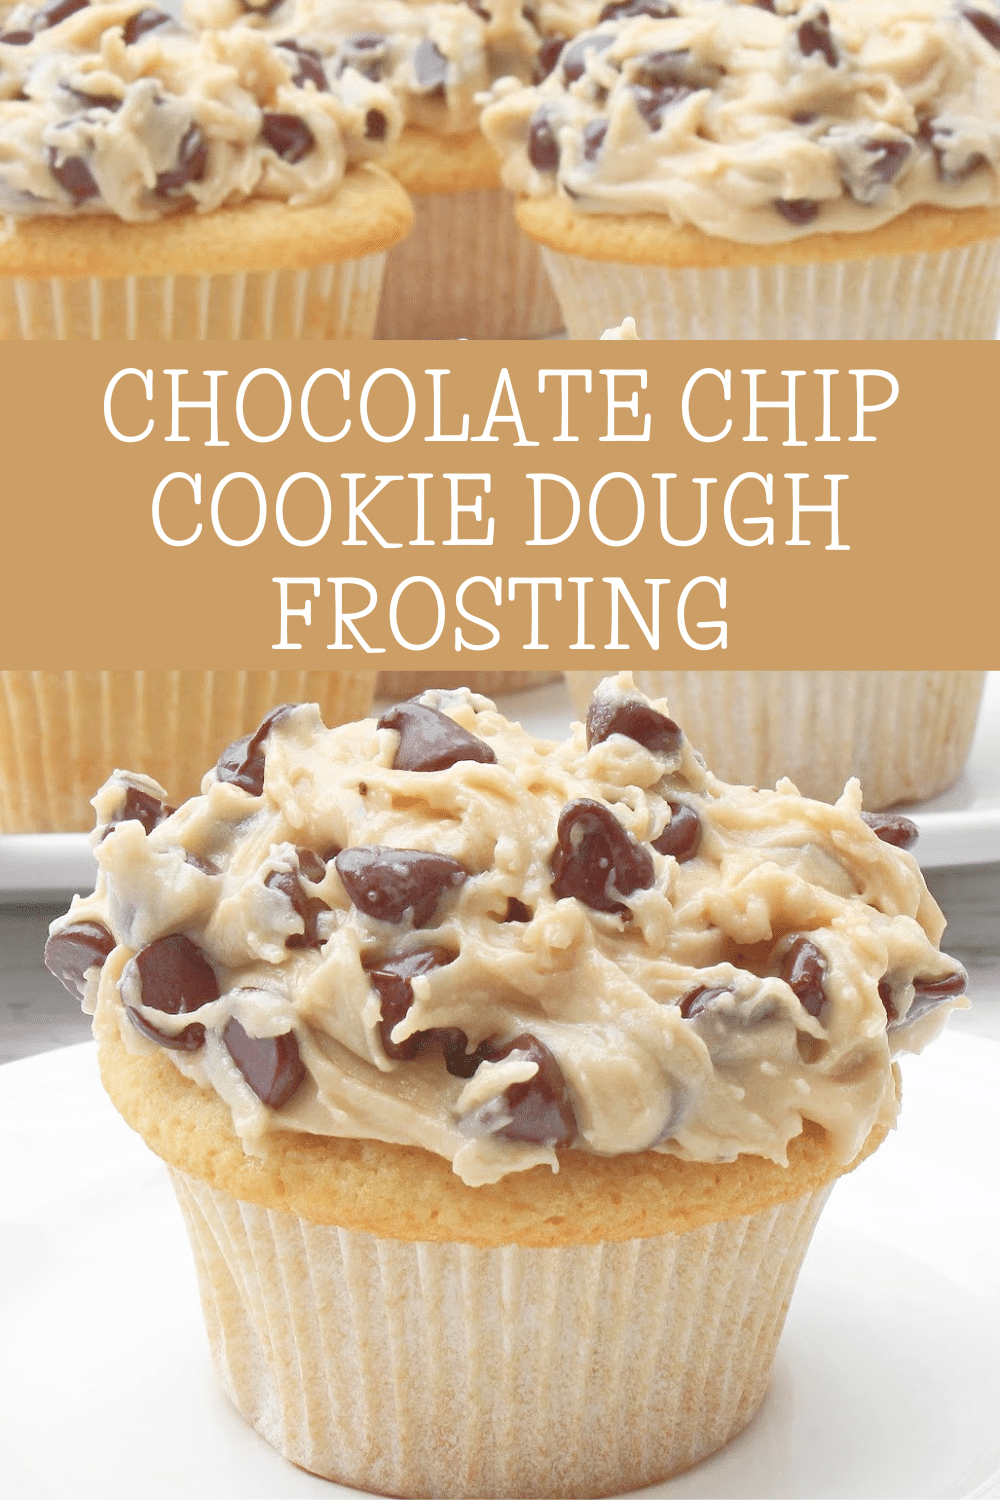 Chocolate Chip Cookie Dough Frosting Recipe ~
Everything you love about chocolate chip cookie dough in a rich, creamy, and spreadable frosting! via @thiswifecooks